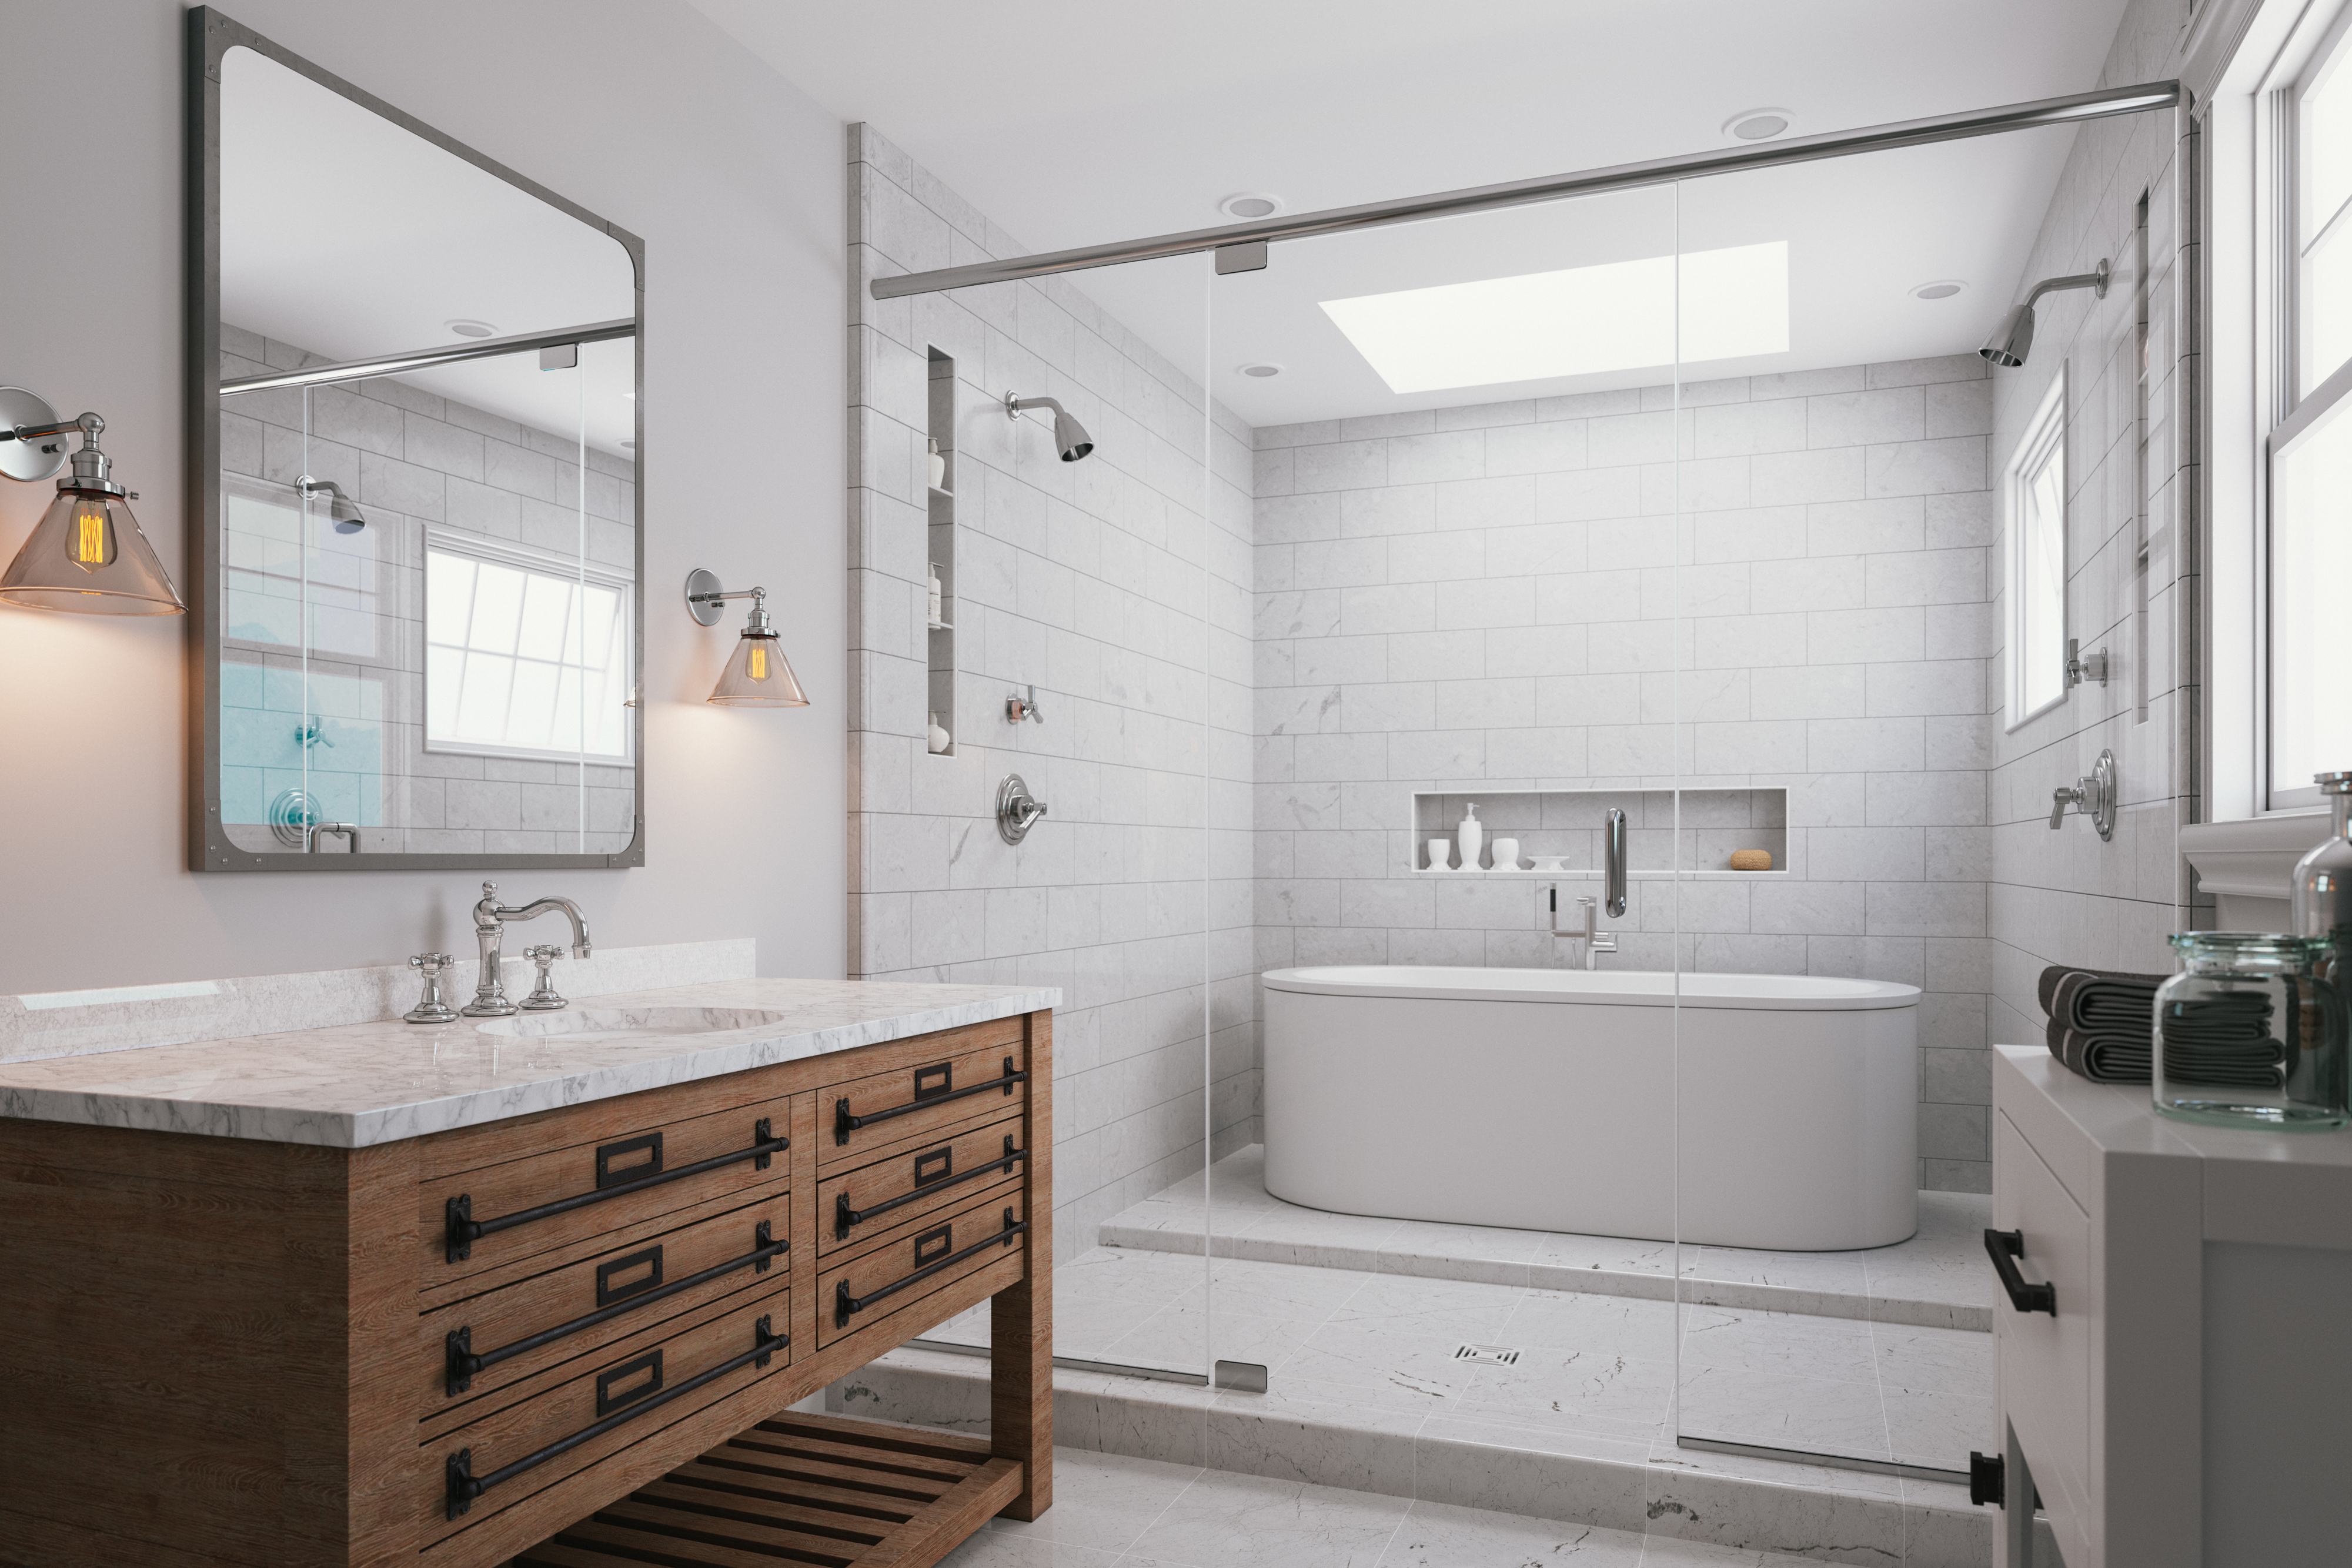 Modern bathroom with a freestanding tub, glass shower, and double vanity